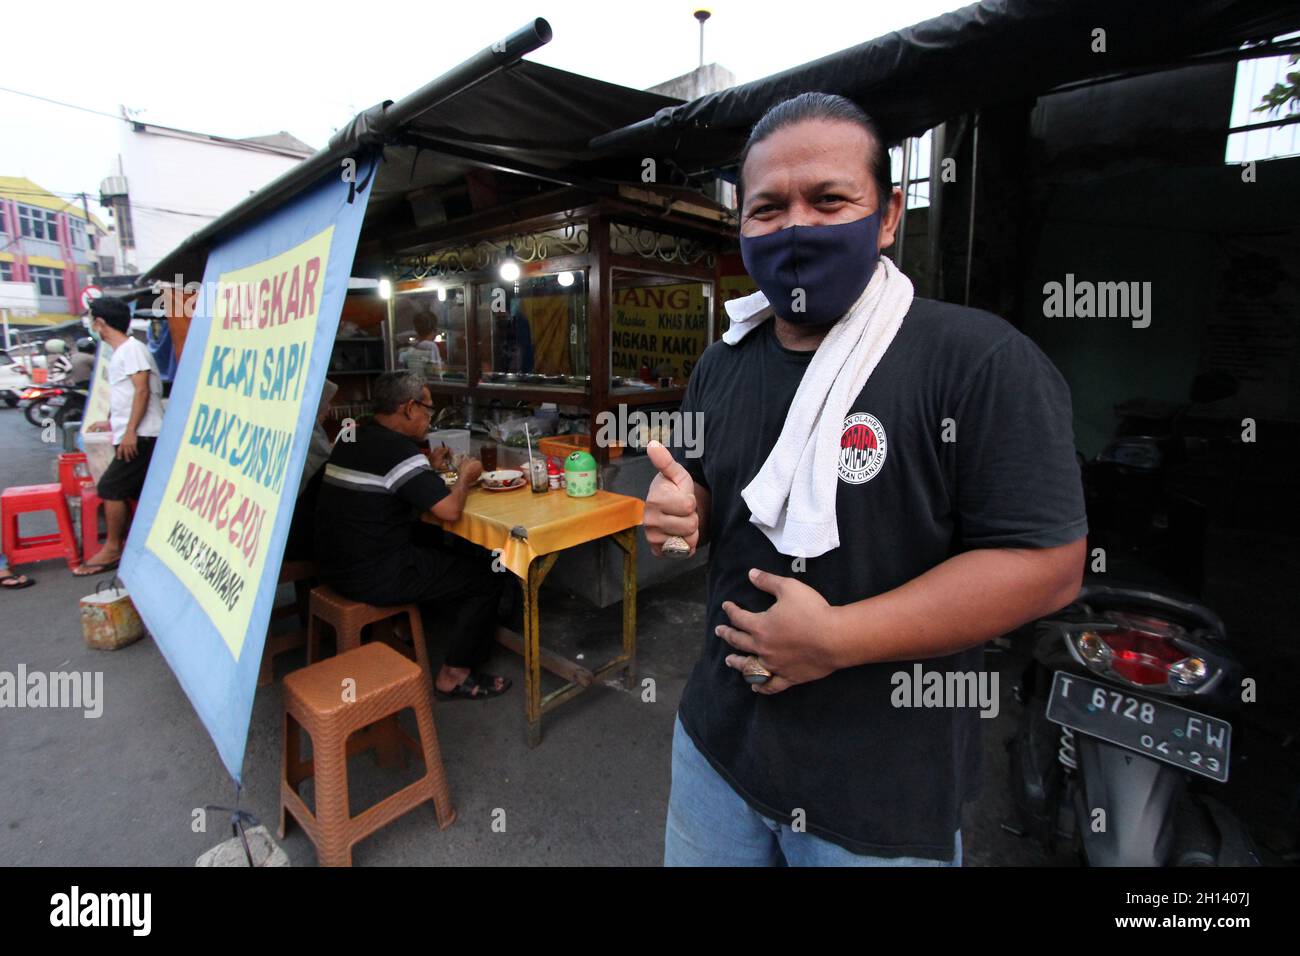 Karawang, Indonesia. 15th Oct, 2021. Yayan, 37, he is one of the sons of the owner of Warung Soto Tangkar Mang Endi who has been selling since the 1970s, poses for a photo at the legendary food stall Soto Tangkar typical of Karawang on Jalan Dewi Sartika, West Karawang, Karawang, West Java, Indonesia. This soto dish uses beef ribs and beef leg veins seasoned with turmeric and chili. It tastes savory and slightly sweet. Interestingly, this delicious dish is cooked traditionally. Almost all ingredients are steamed in a pot over coals of firewood. The growth of micro, small and medium enterprises Stock Photo